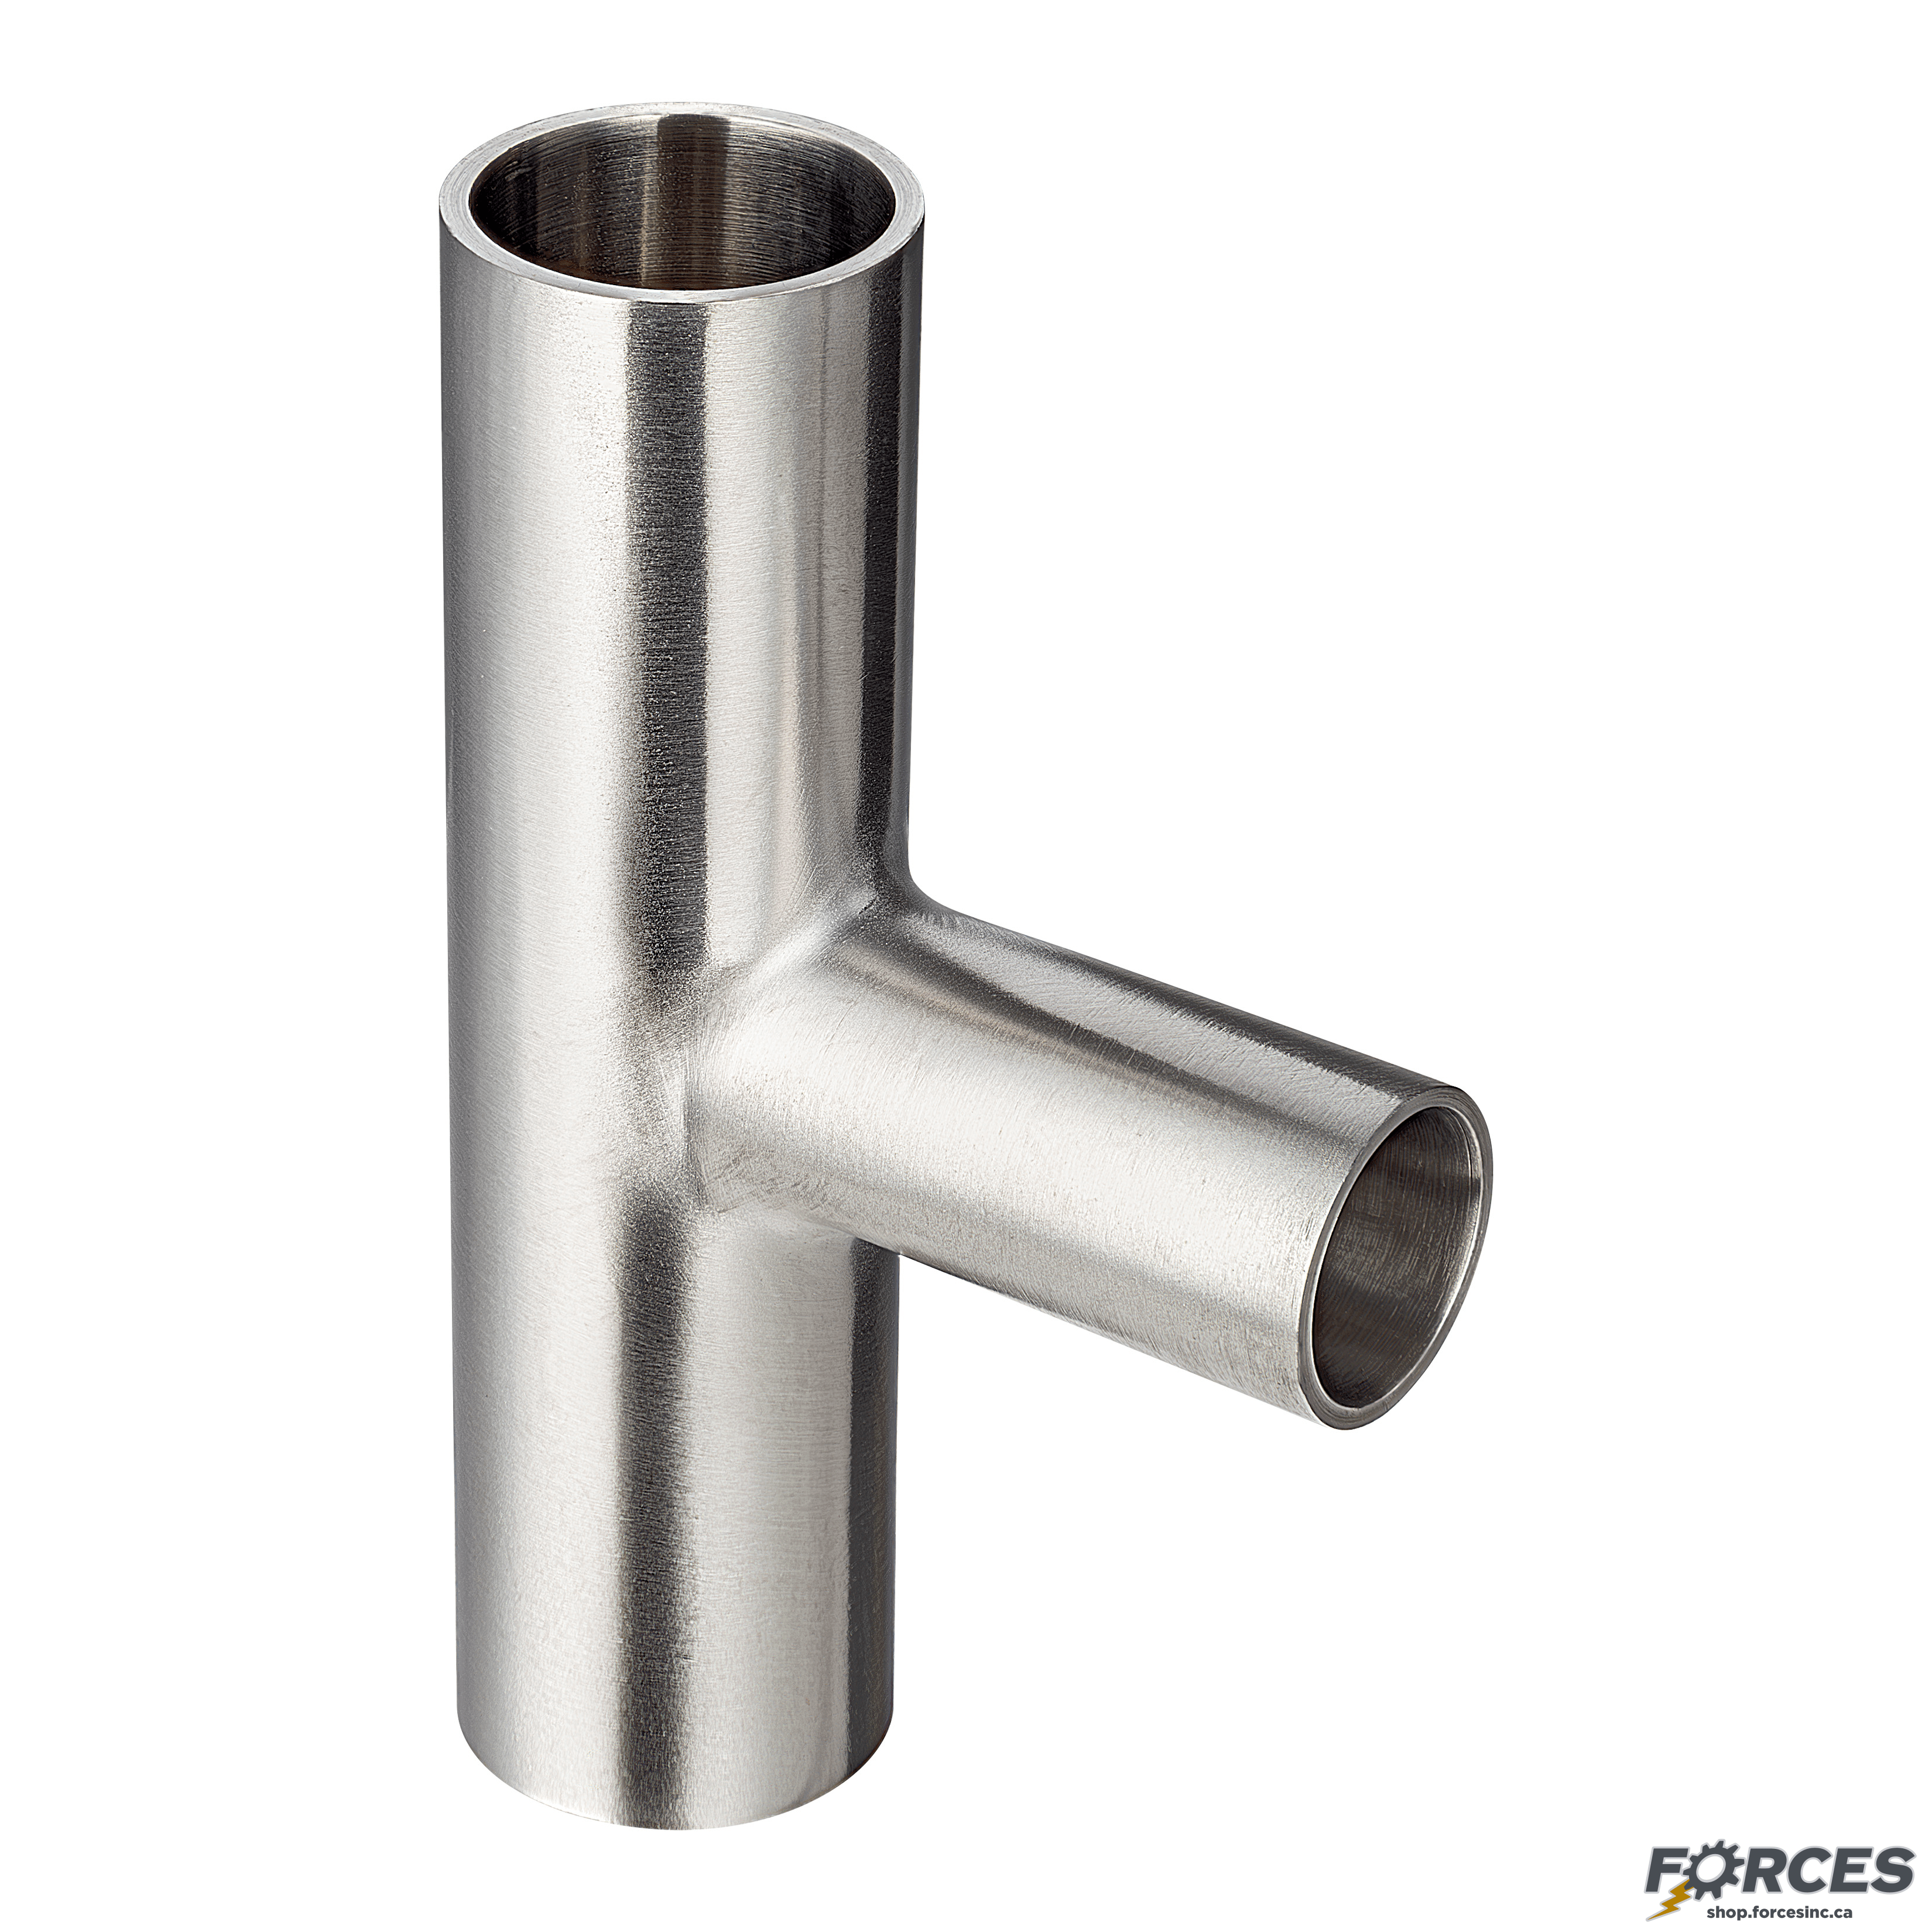 2" x 1" Butt Weld Tee Reducer - Stainless Steel 316 - Forces Inc